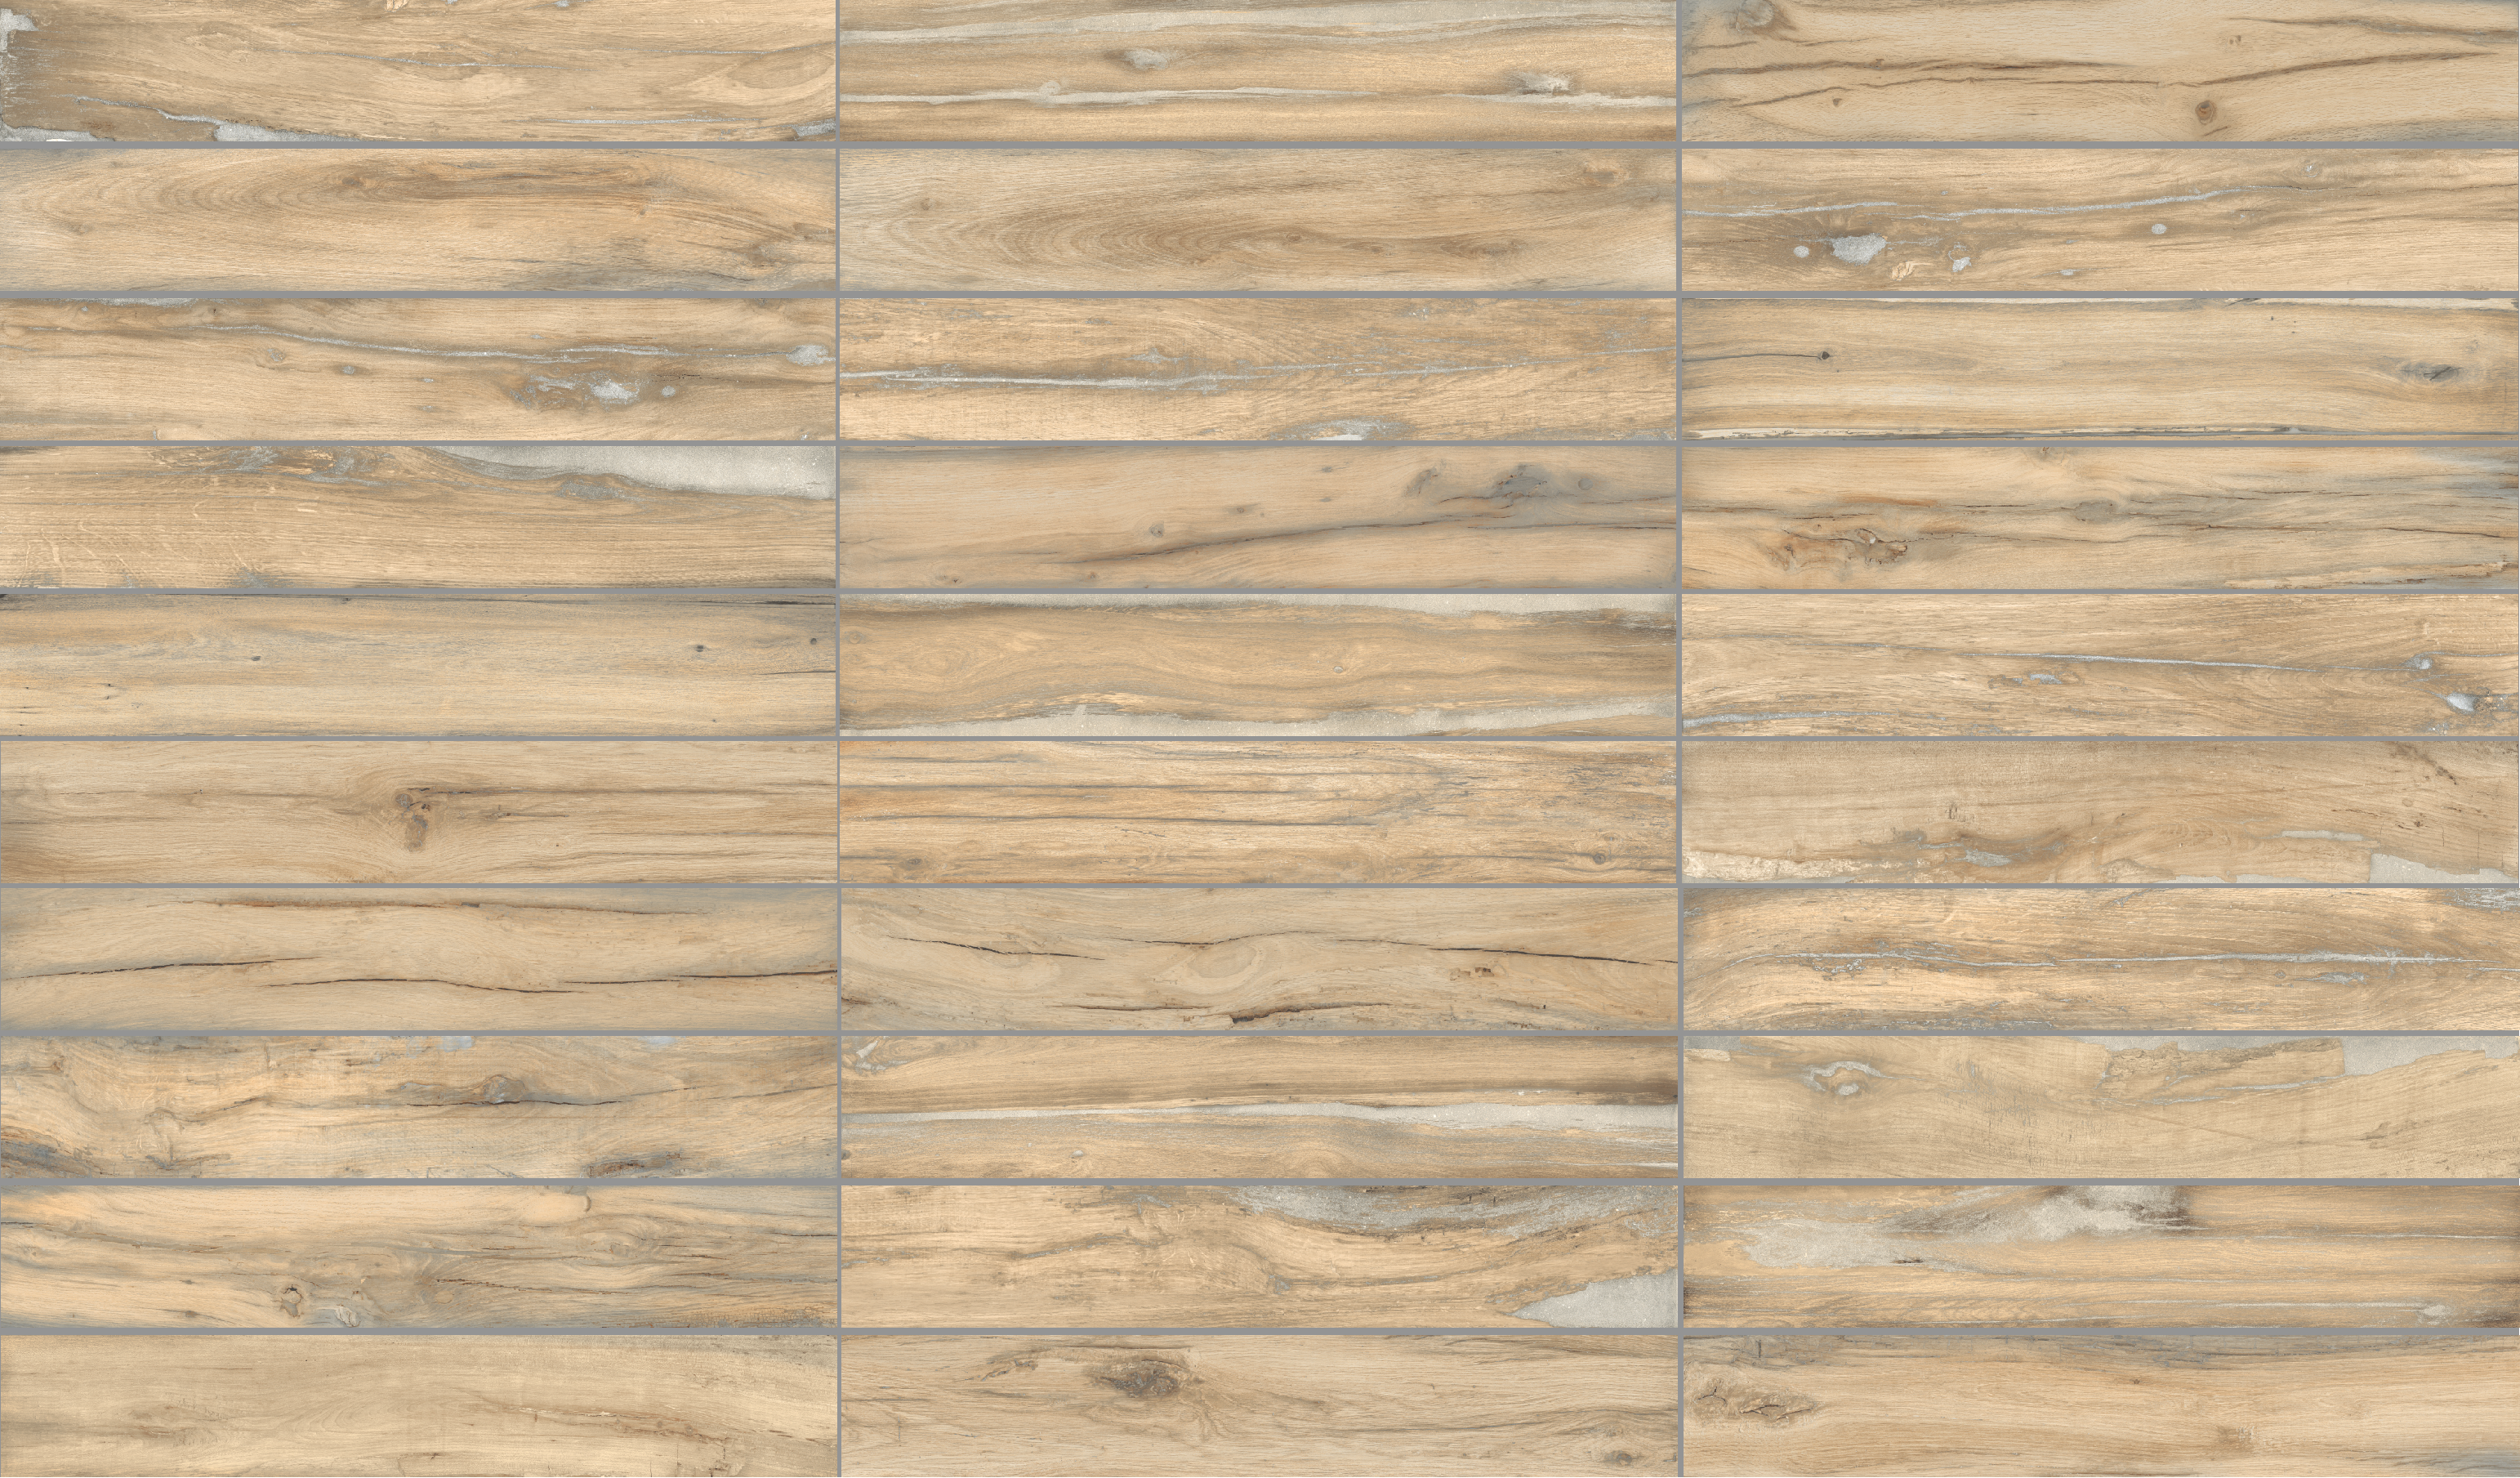 Wood tile collection: wood grain and wood look ceramic tile. Shop